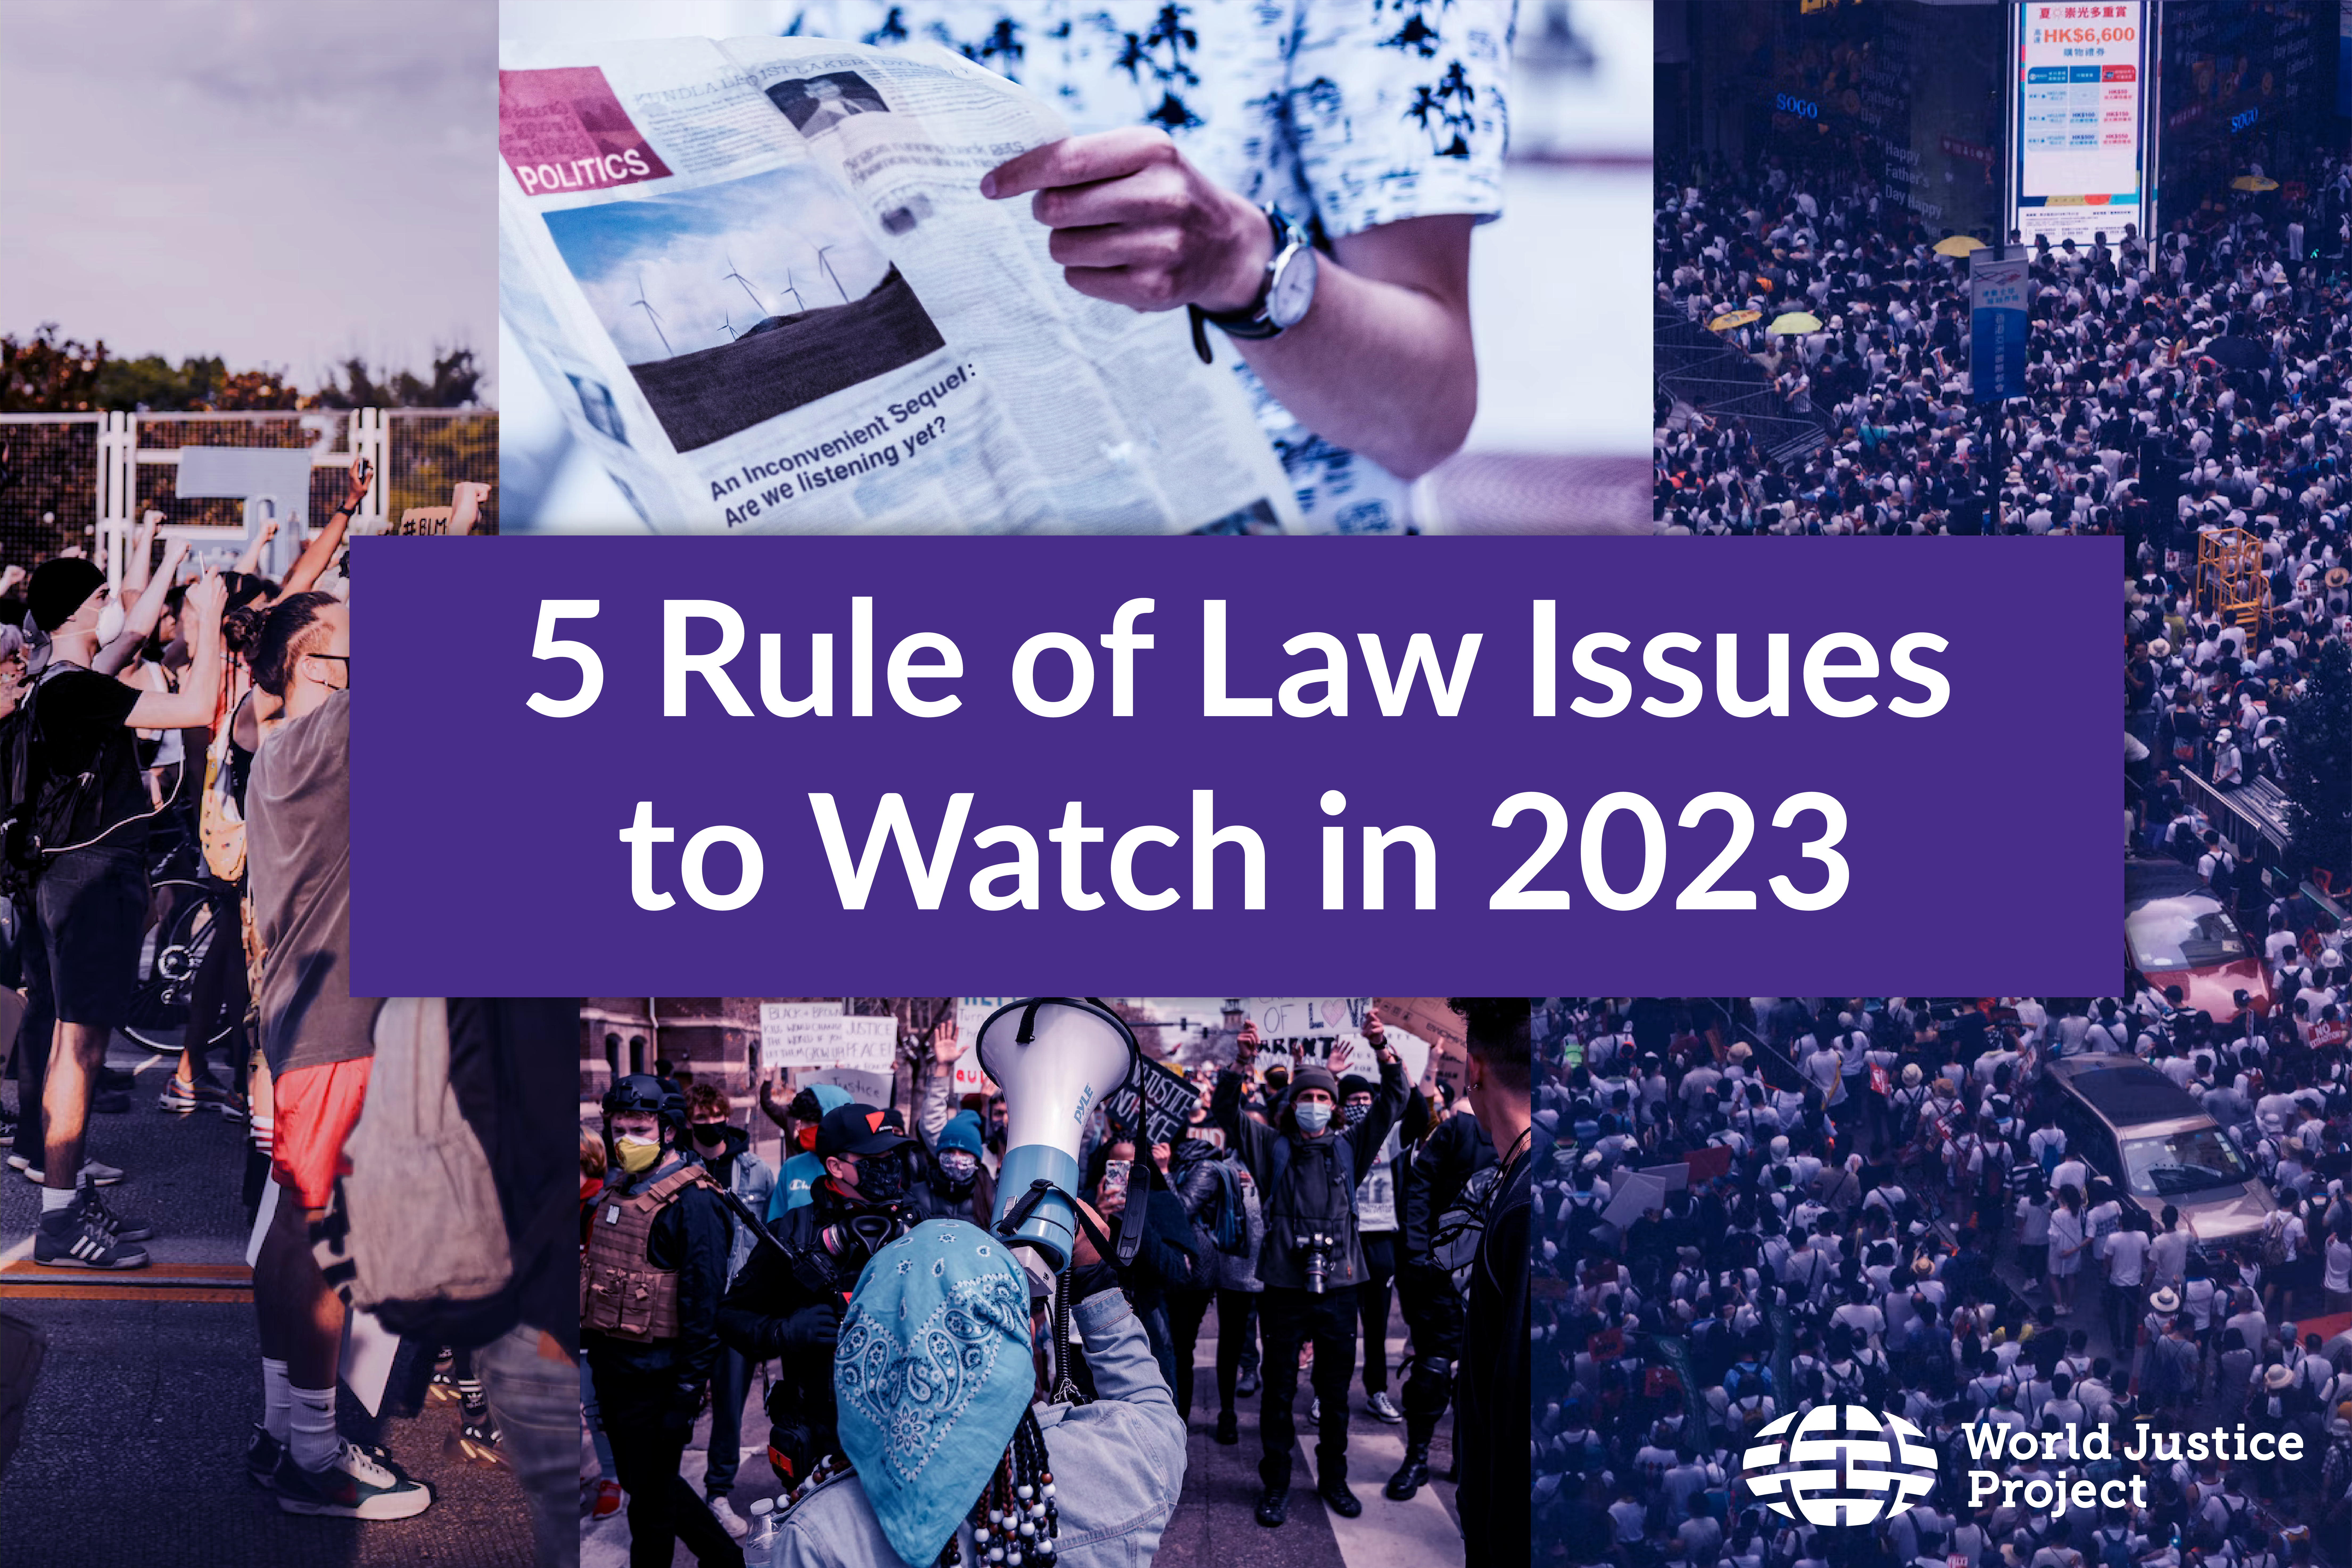 A collage of rule of law images with the text "5 Rule of Law Issues to Watch in 2023"